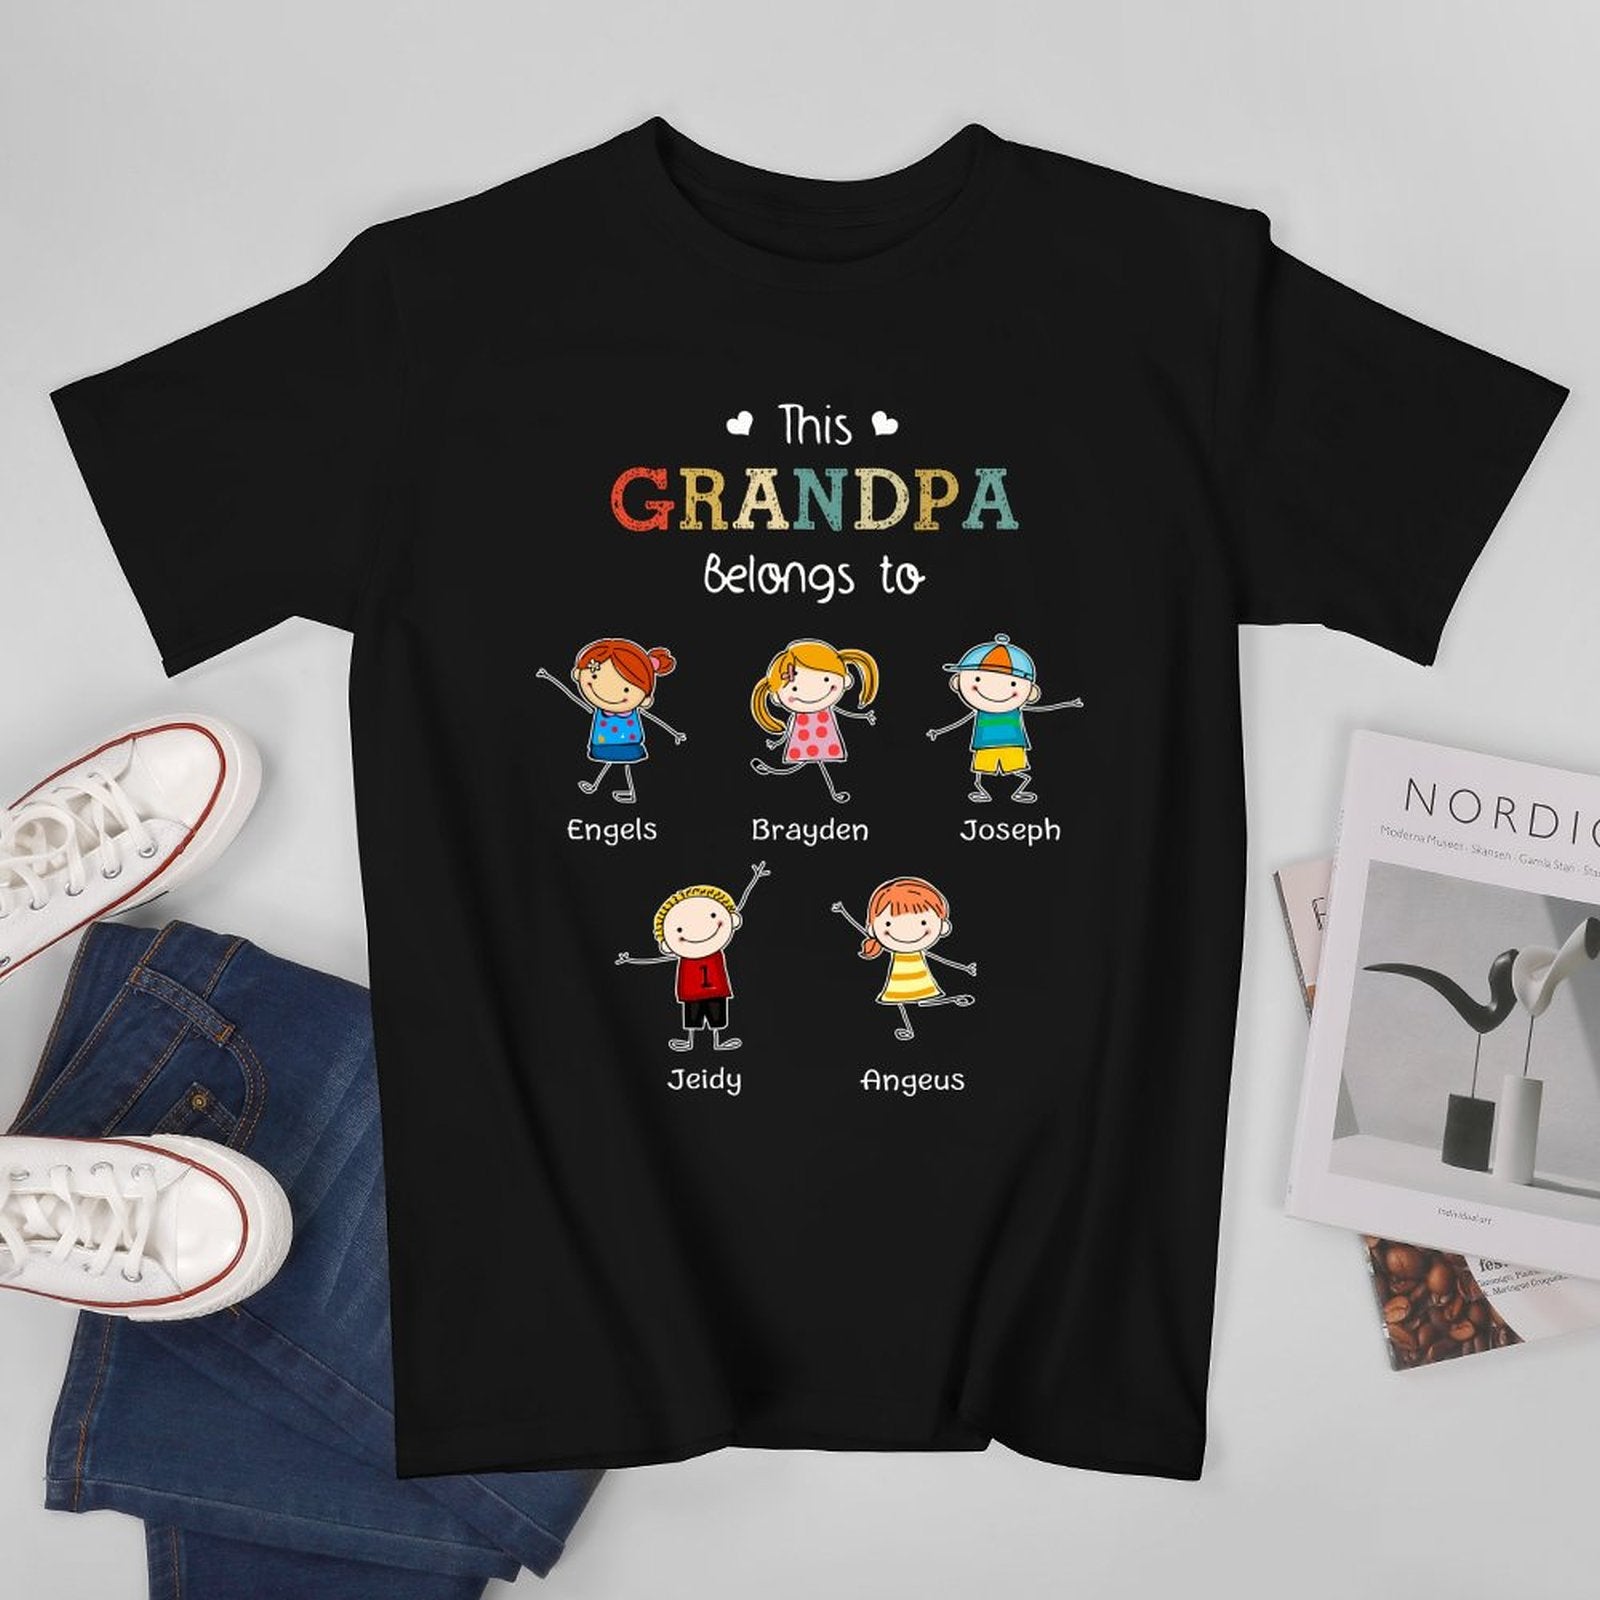 Father's Day Gift, Personalized Custom Cartoon T-Shirt As Father's Day Birthday Gifts For Men Dad - Best Dad In The World - colorfulcustom